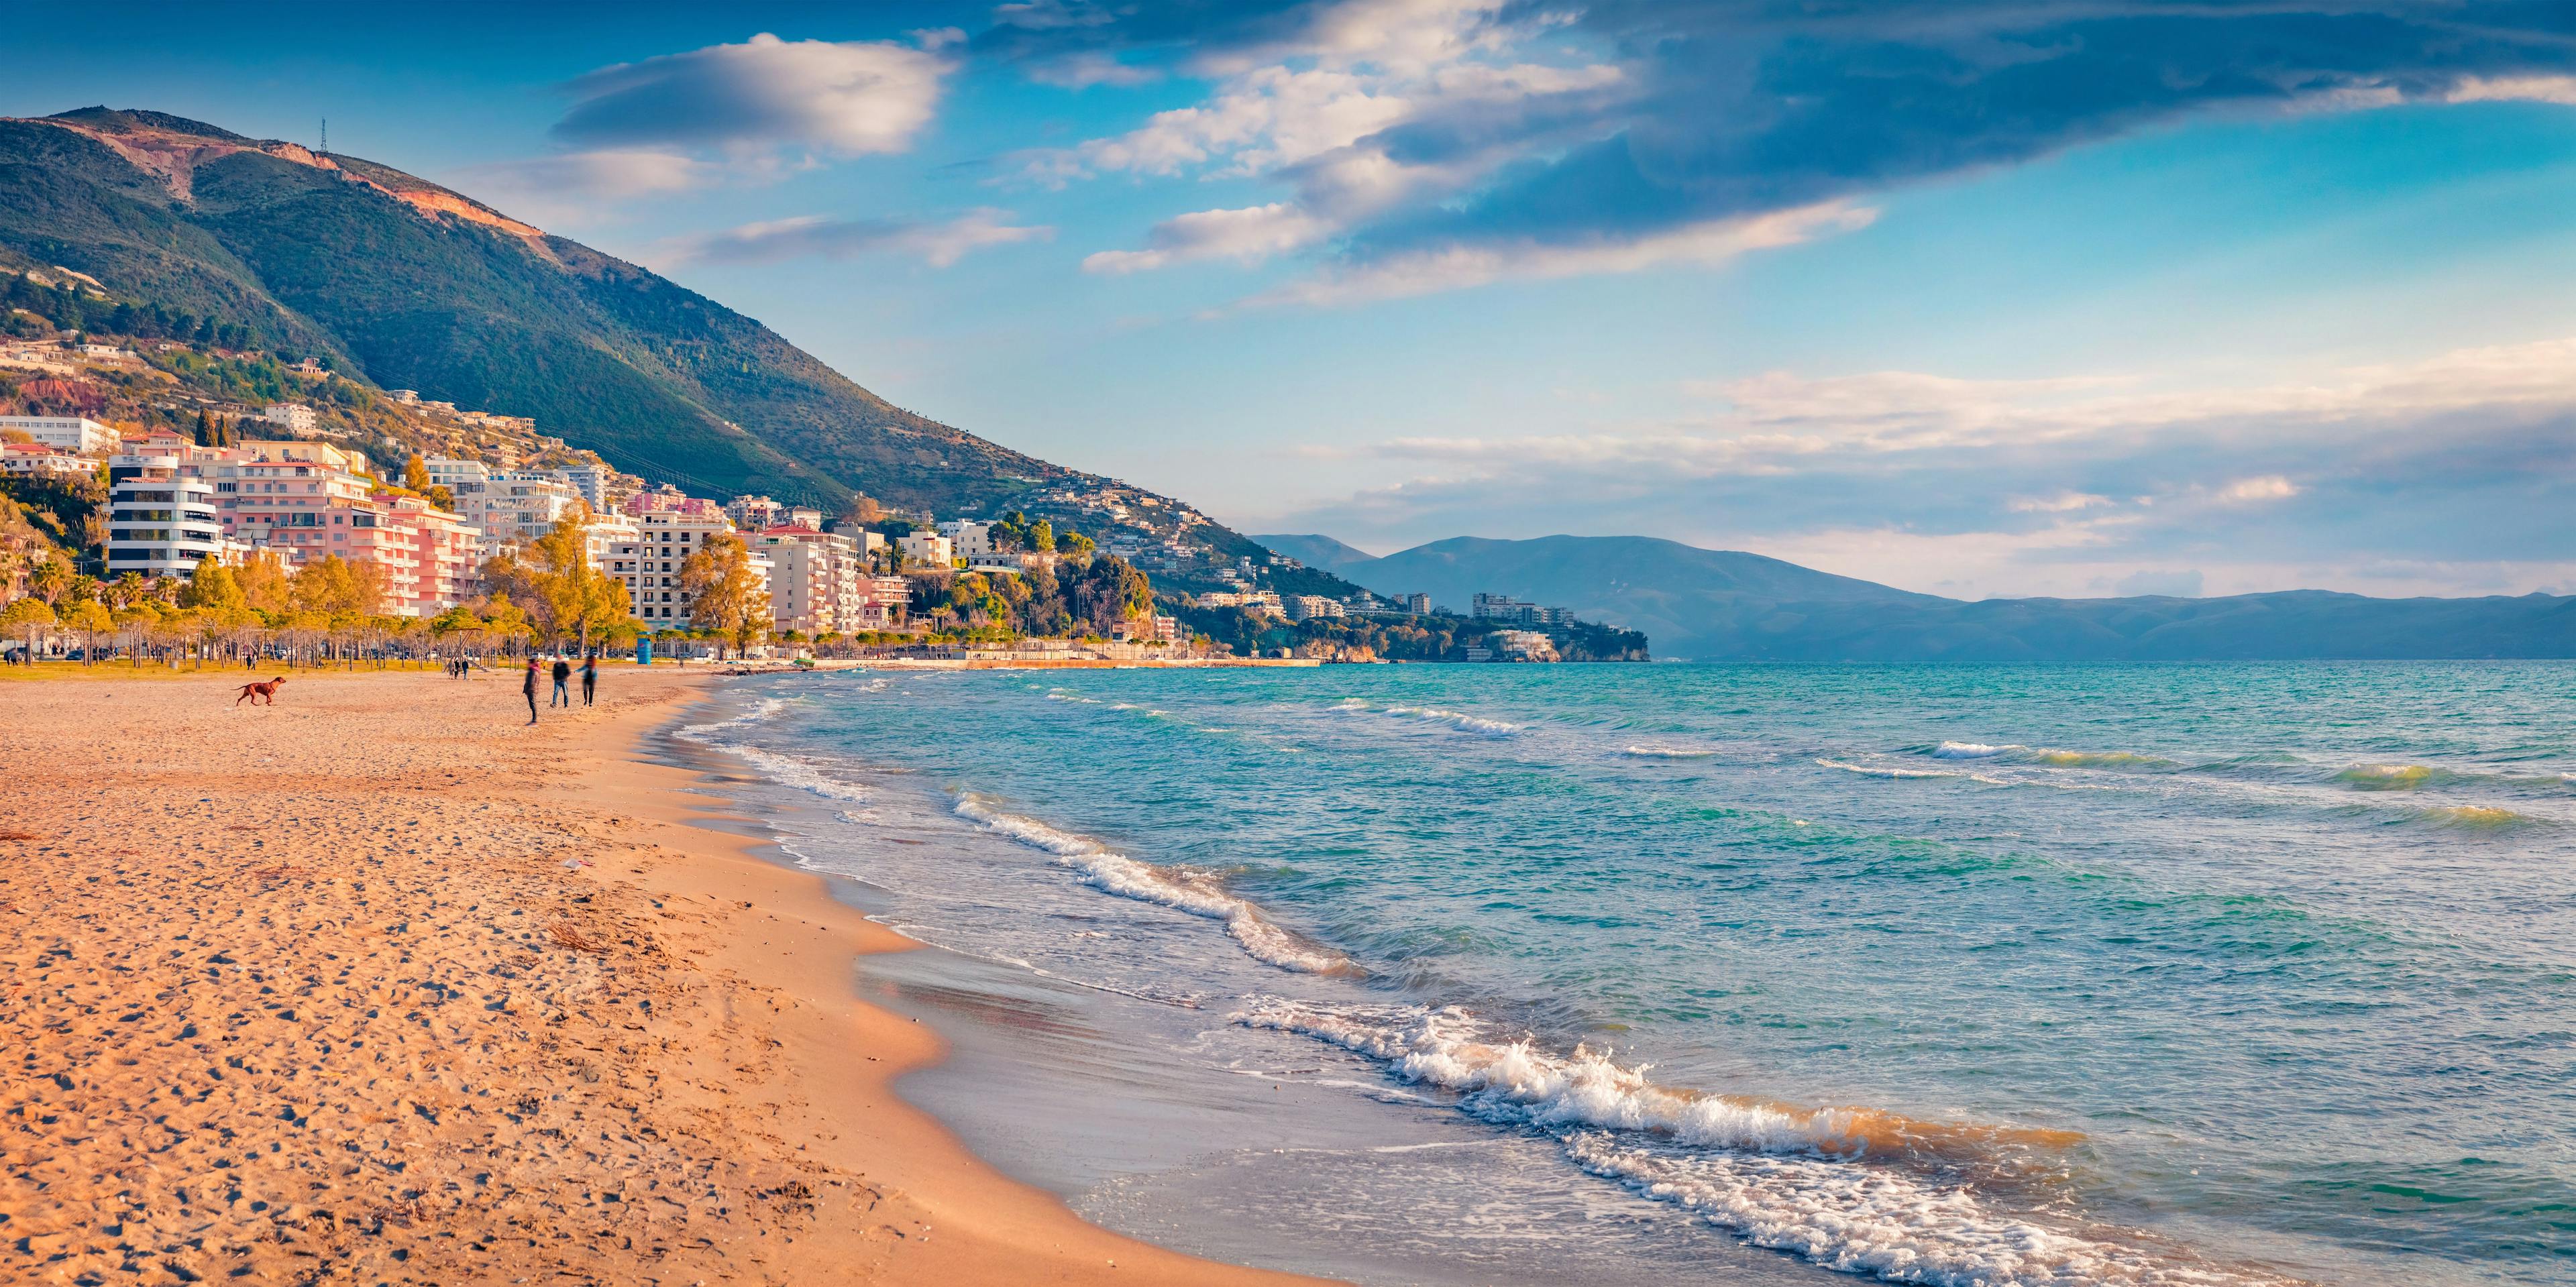 Trending Destination: What to See in Albania - Vlore - RatePunk